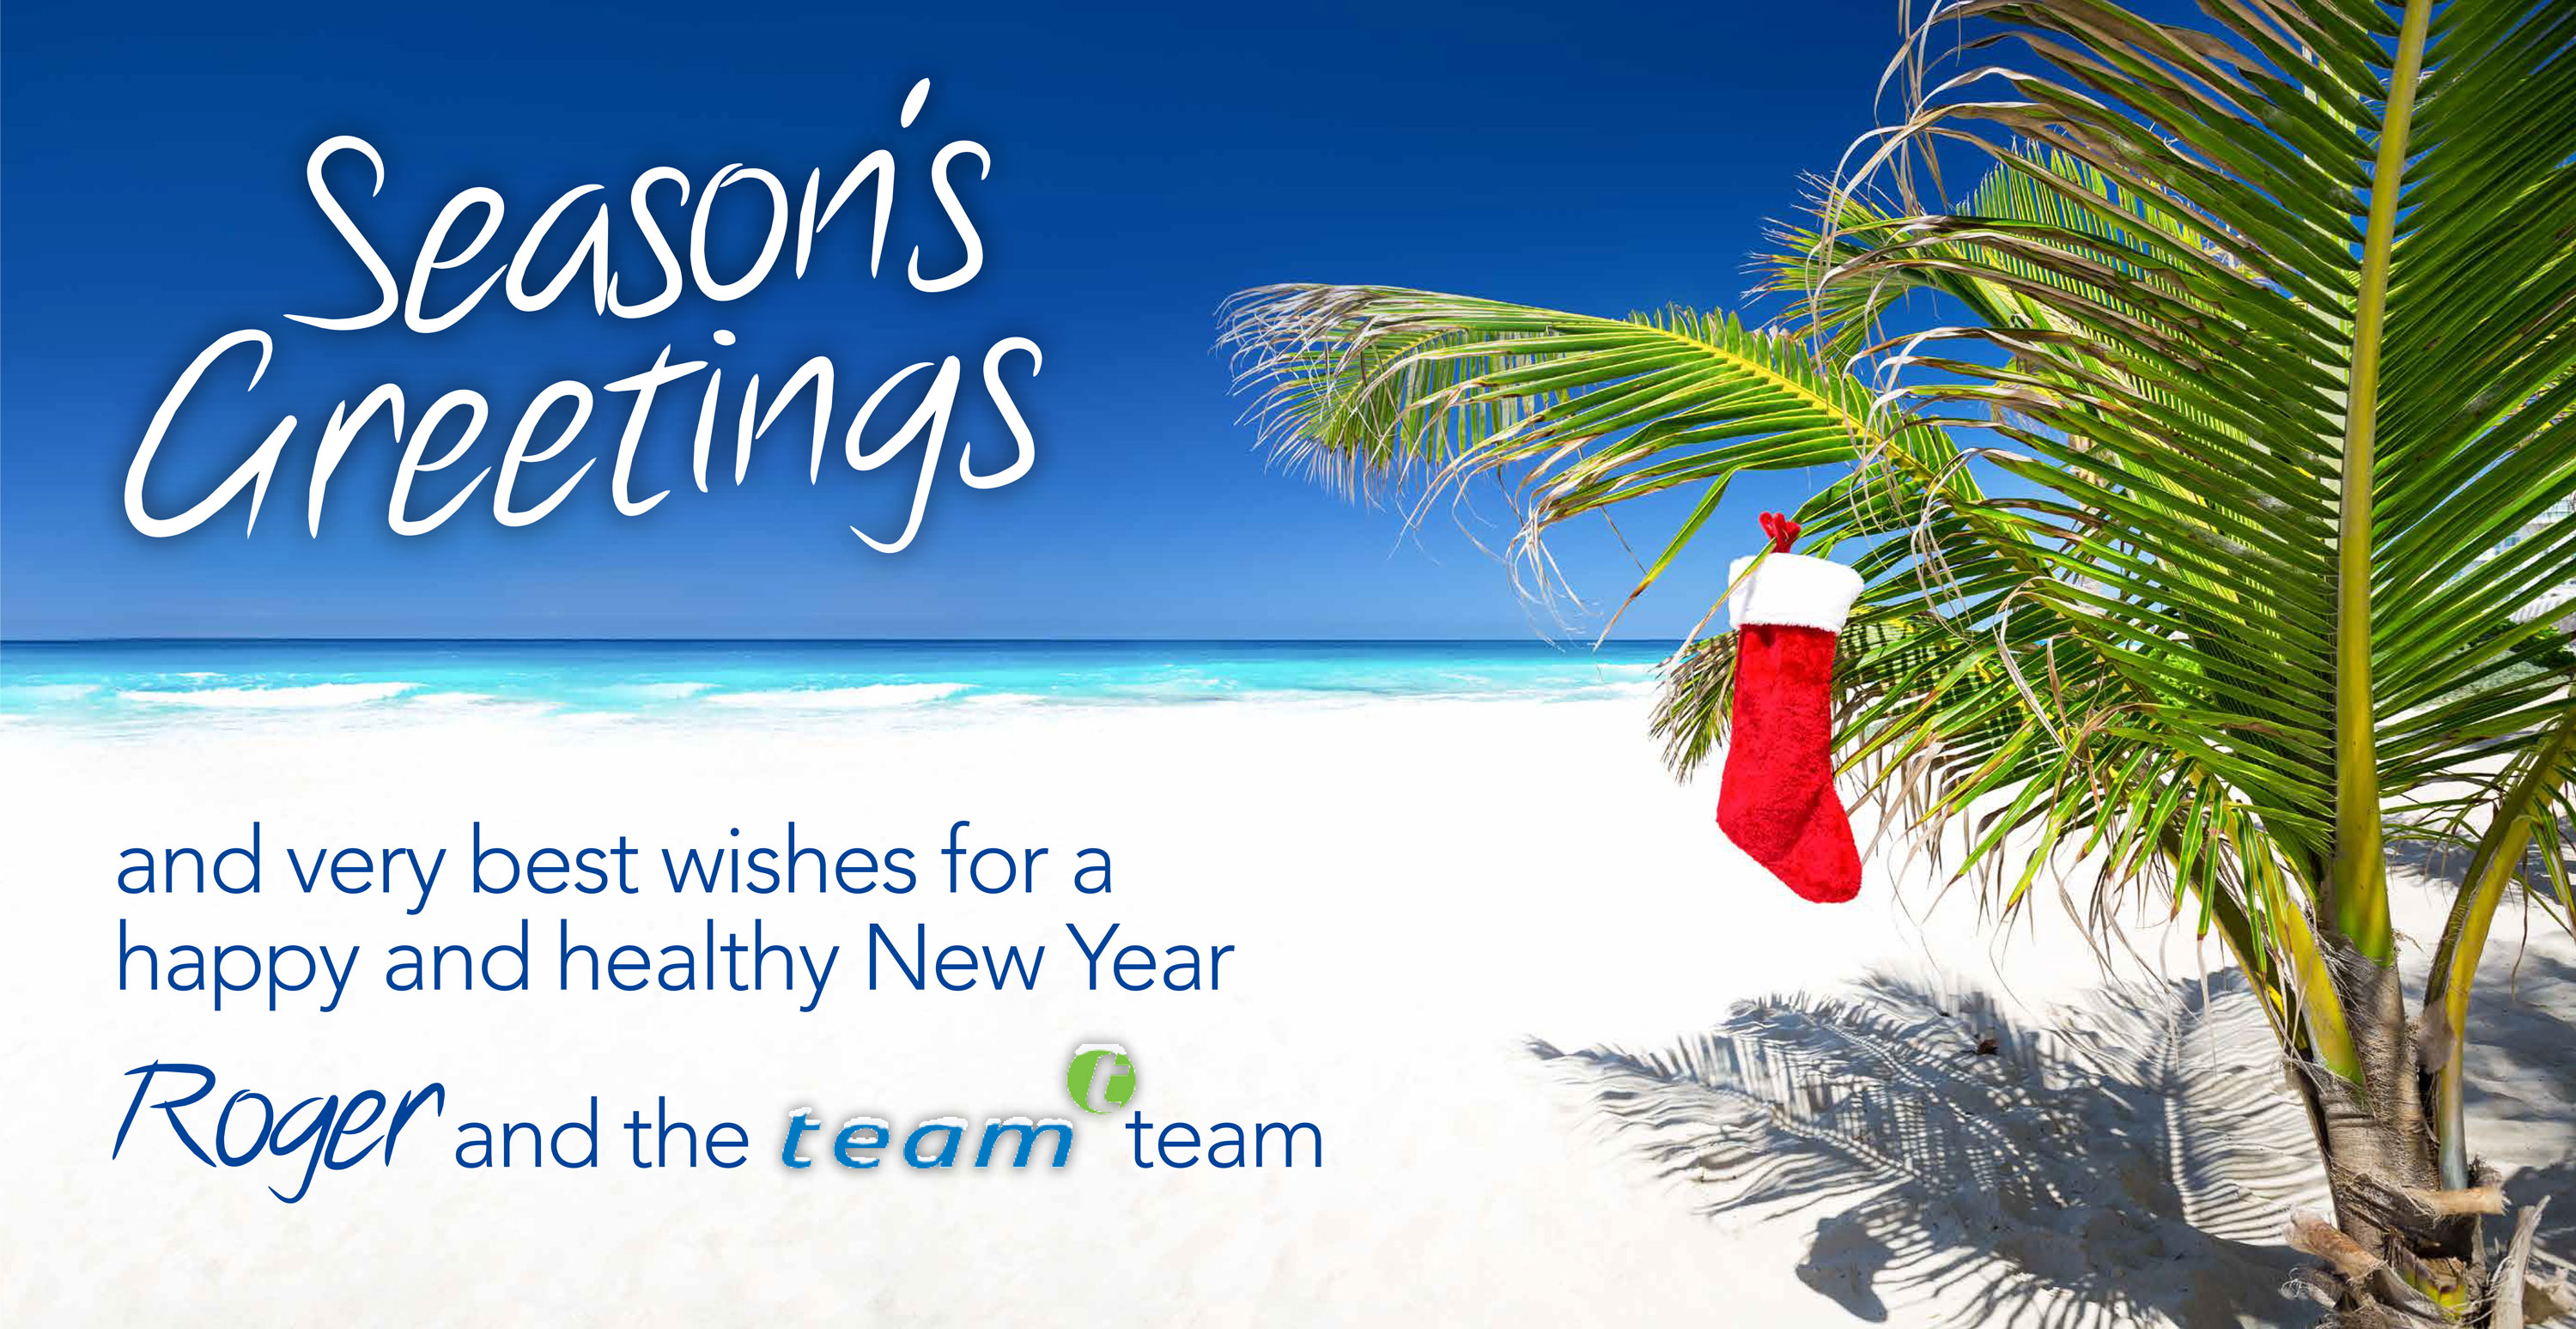 Season's greetings and very best wishes for a happy and healthy New Year, from Roger and the TEAM team